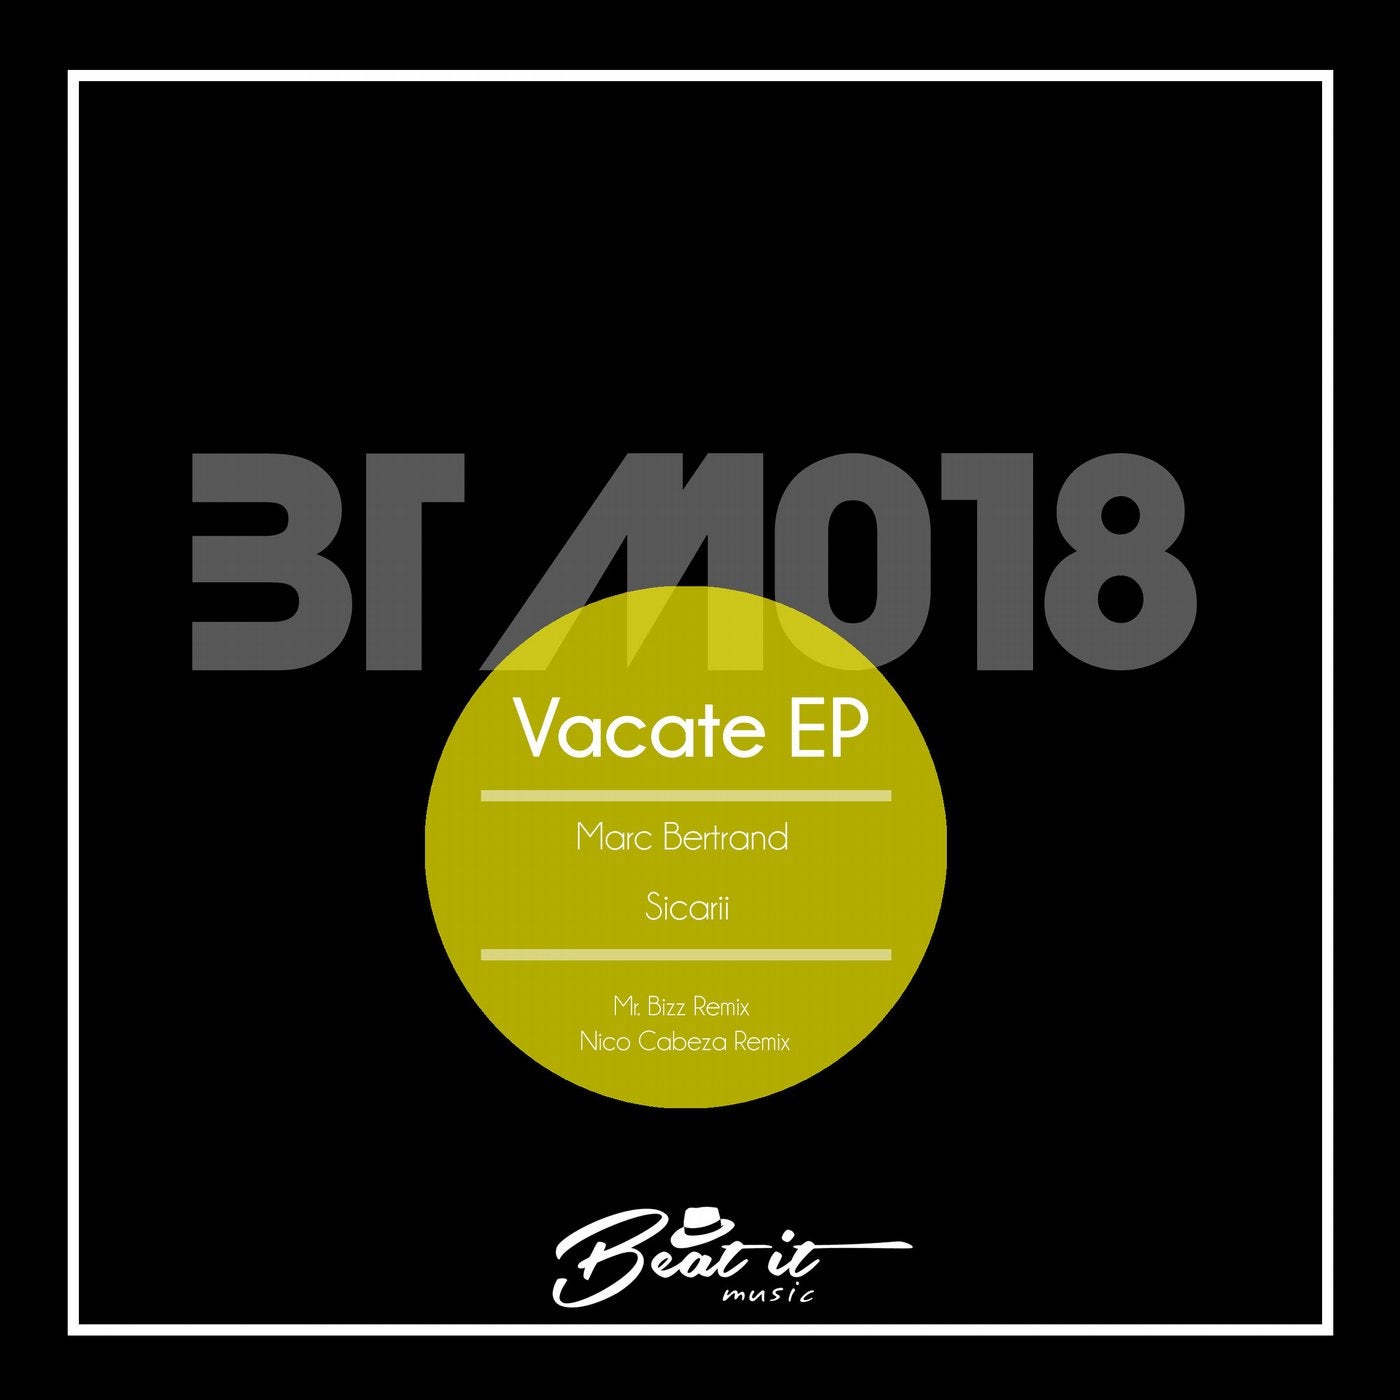 Vacate EP